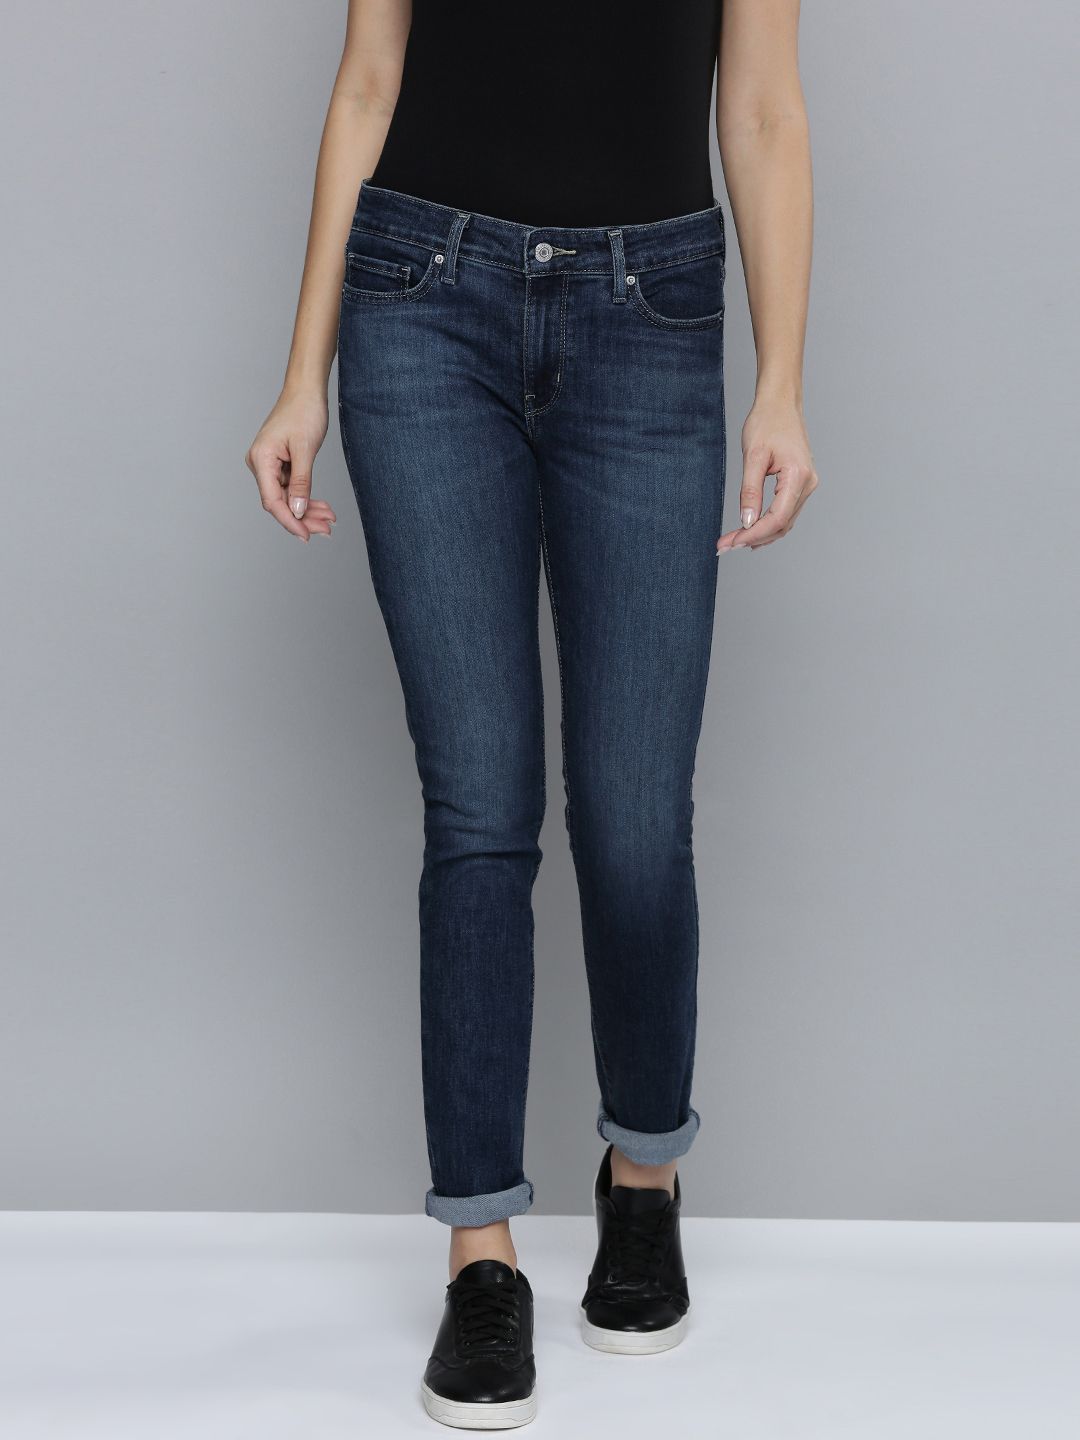 Levis Women Dark Indigo Skinny Fit Light Fade Stretchable Casual Jeans Price in India